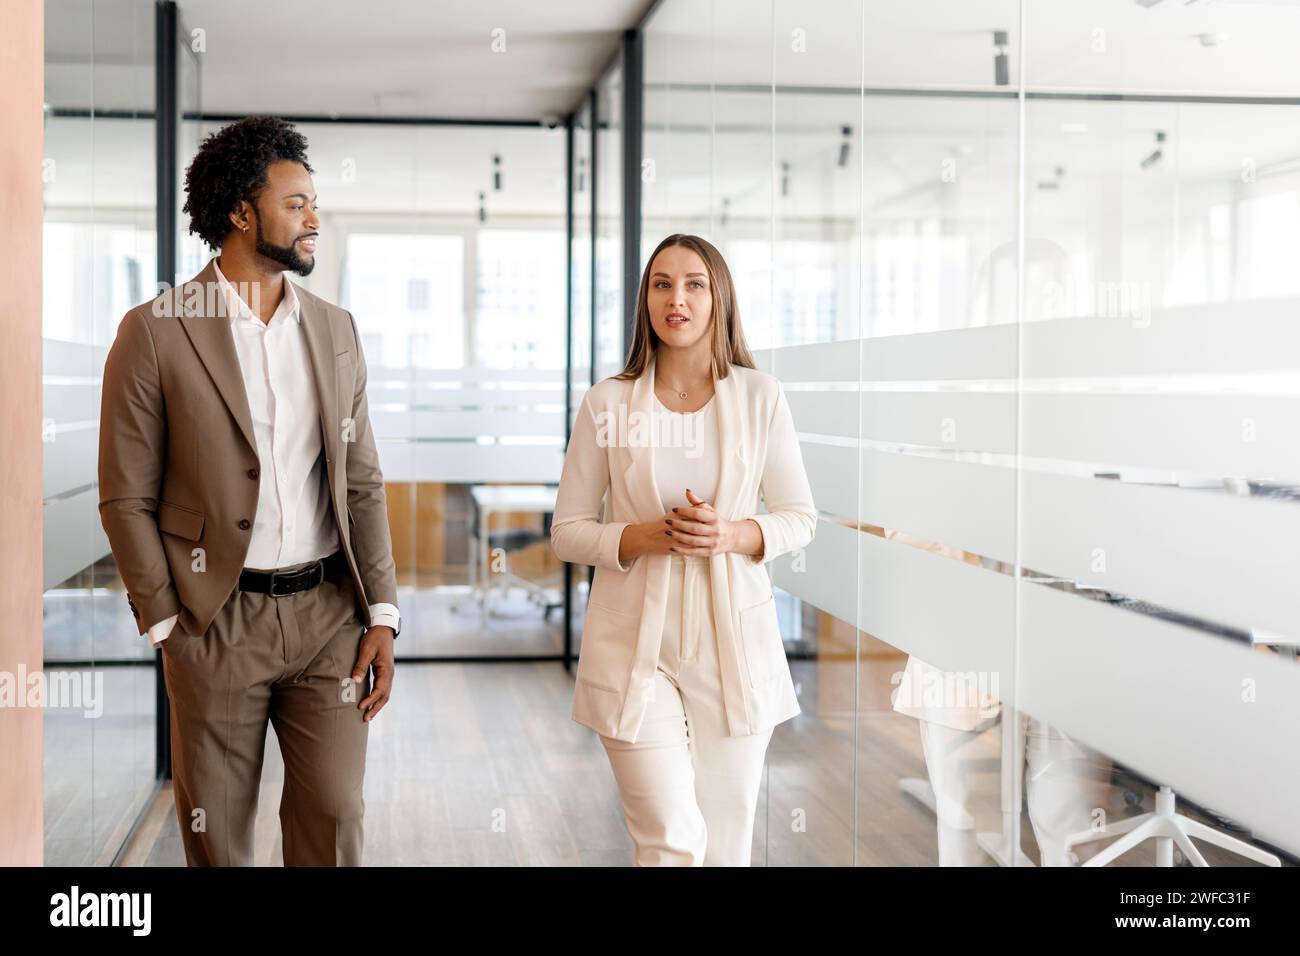 A businesswoman leads the way in an office hallway, with a male colleague alongside her, both exemplifying leadership and a forward-thinking business approach. Teamwork concept Stock Photo